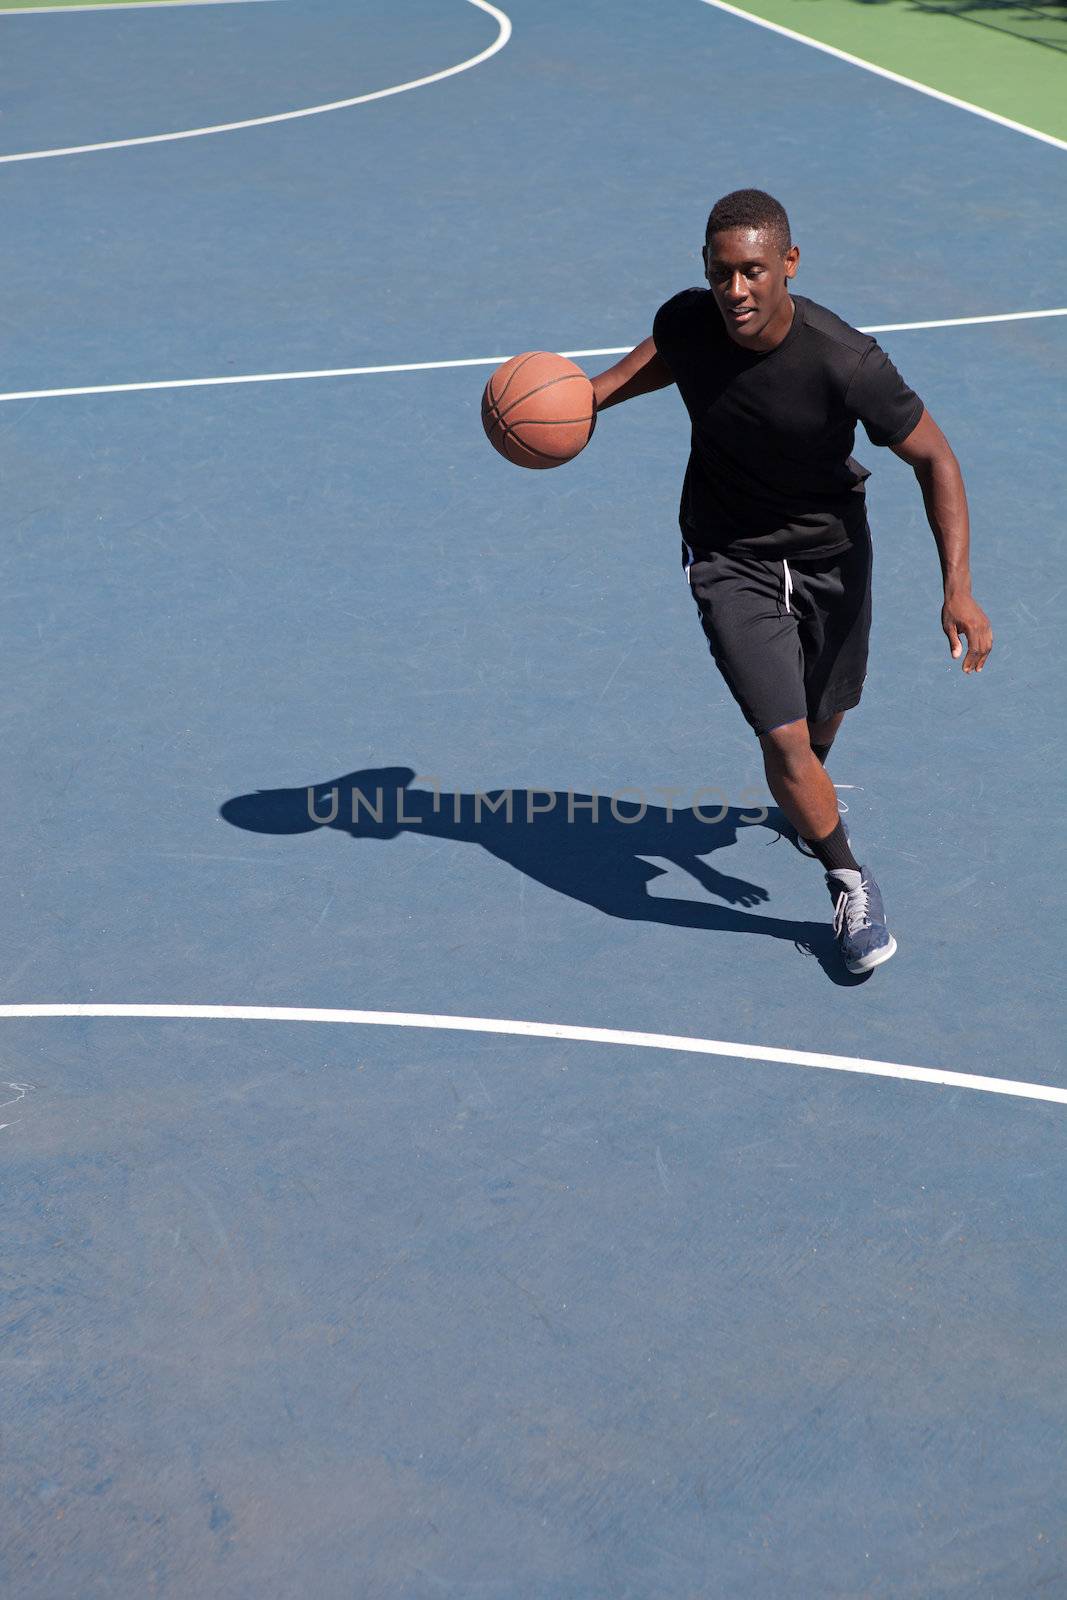 A sweaty young basketball player dribbling down the court demonstrating his ball handling skills.